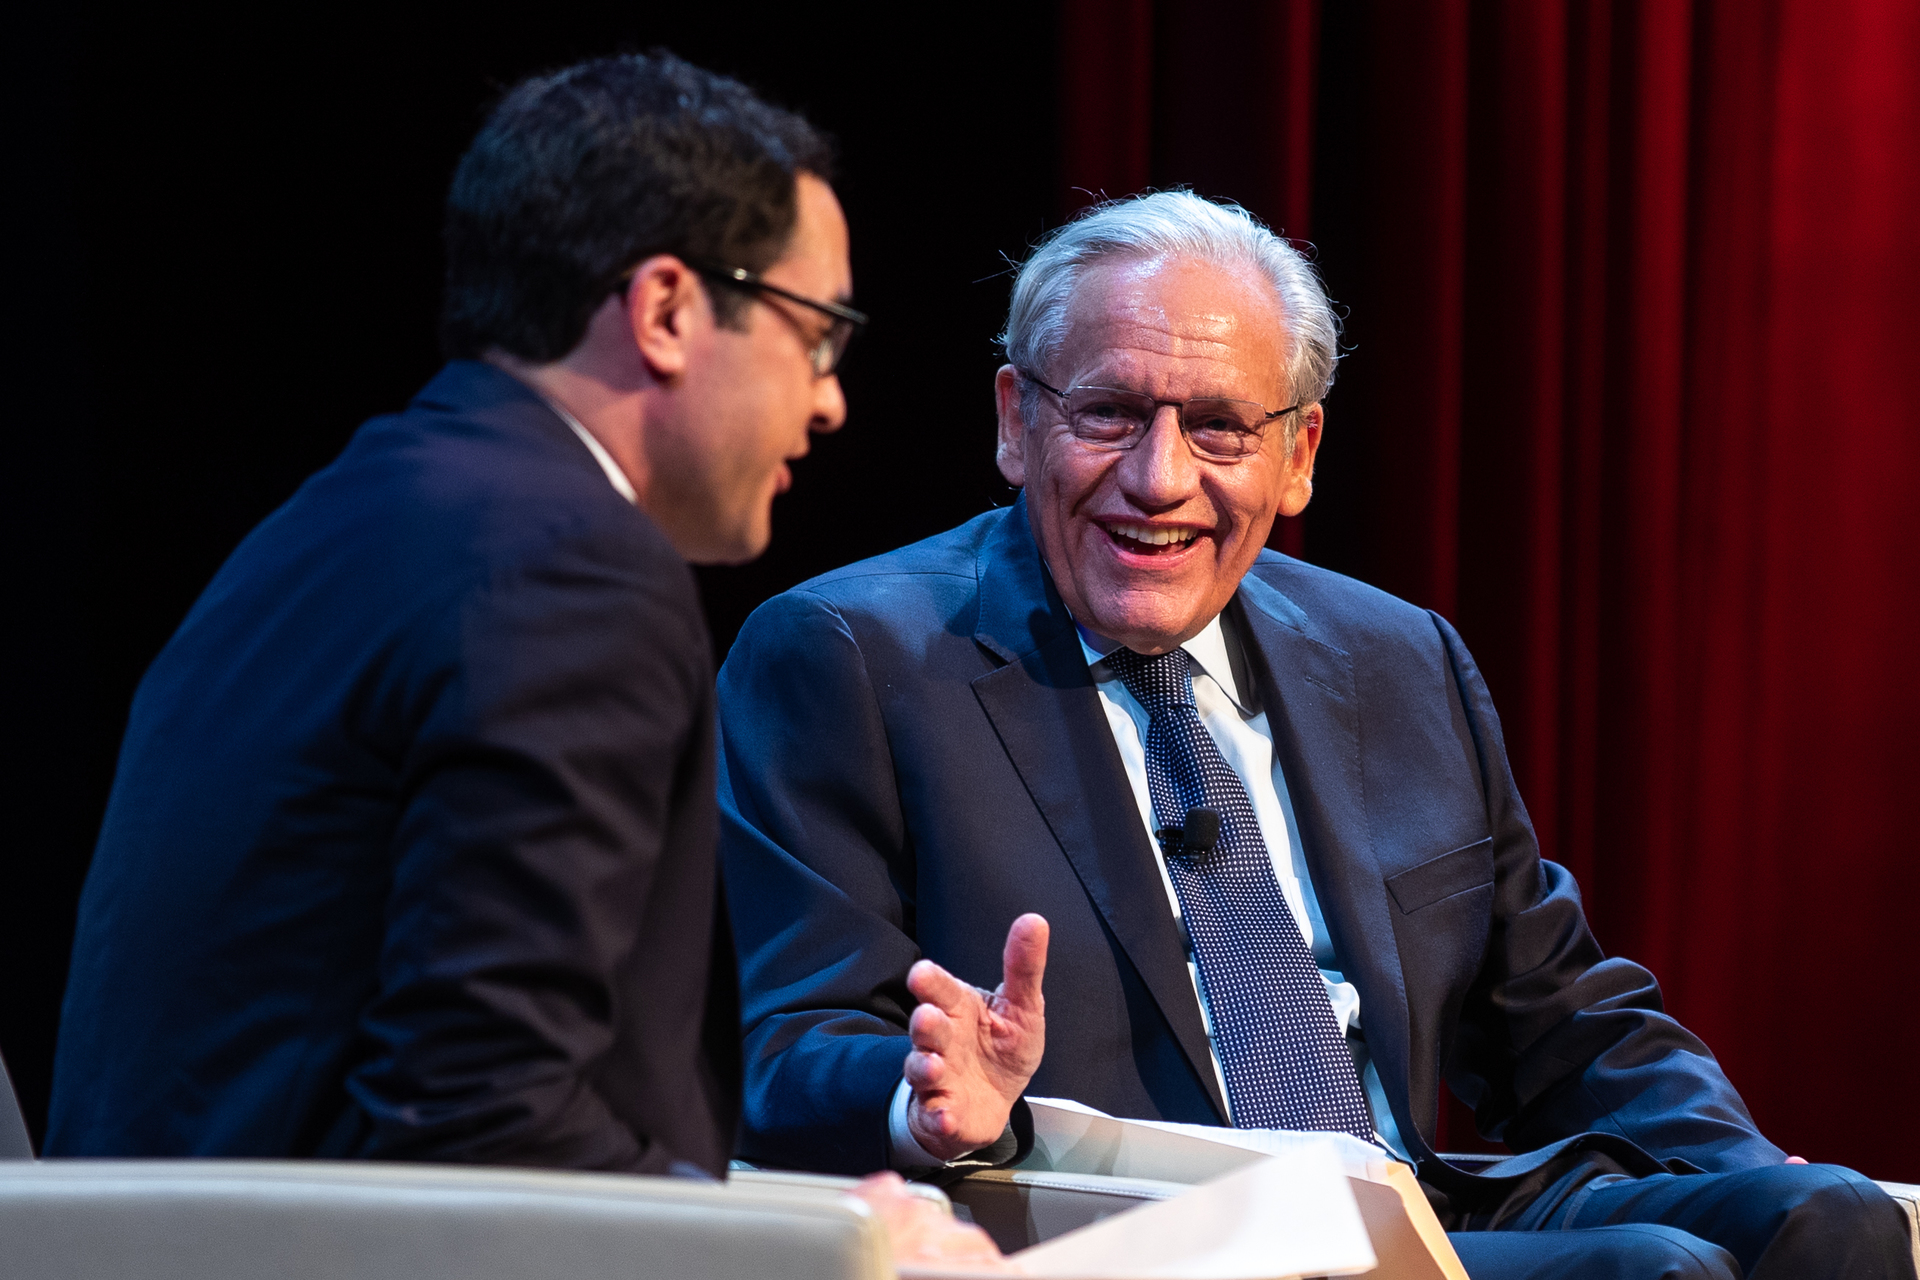 Image of Bob Woodward discussing "Fear" with Michael Schmidt of the New York Times.